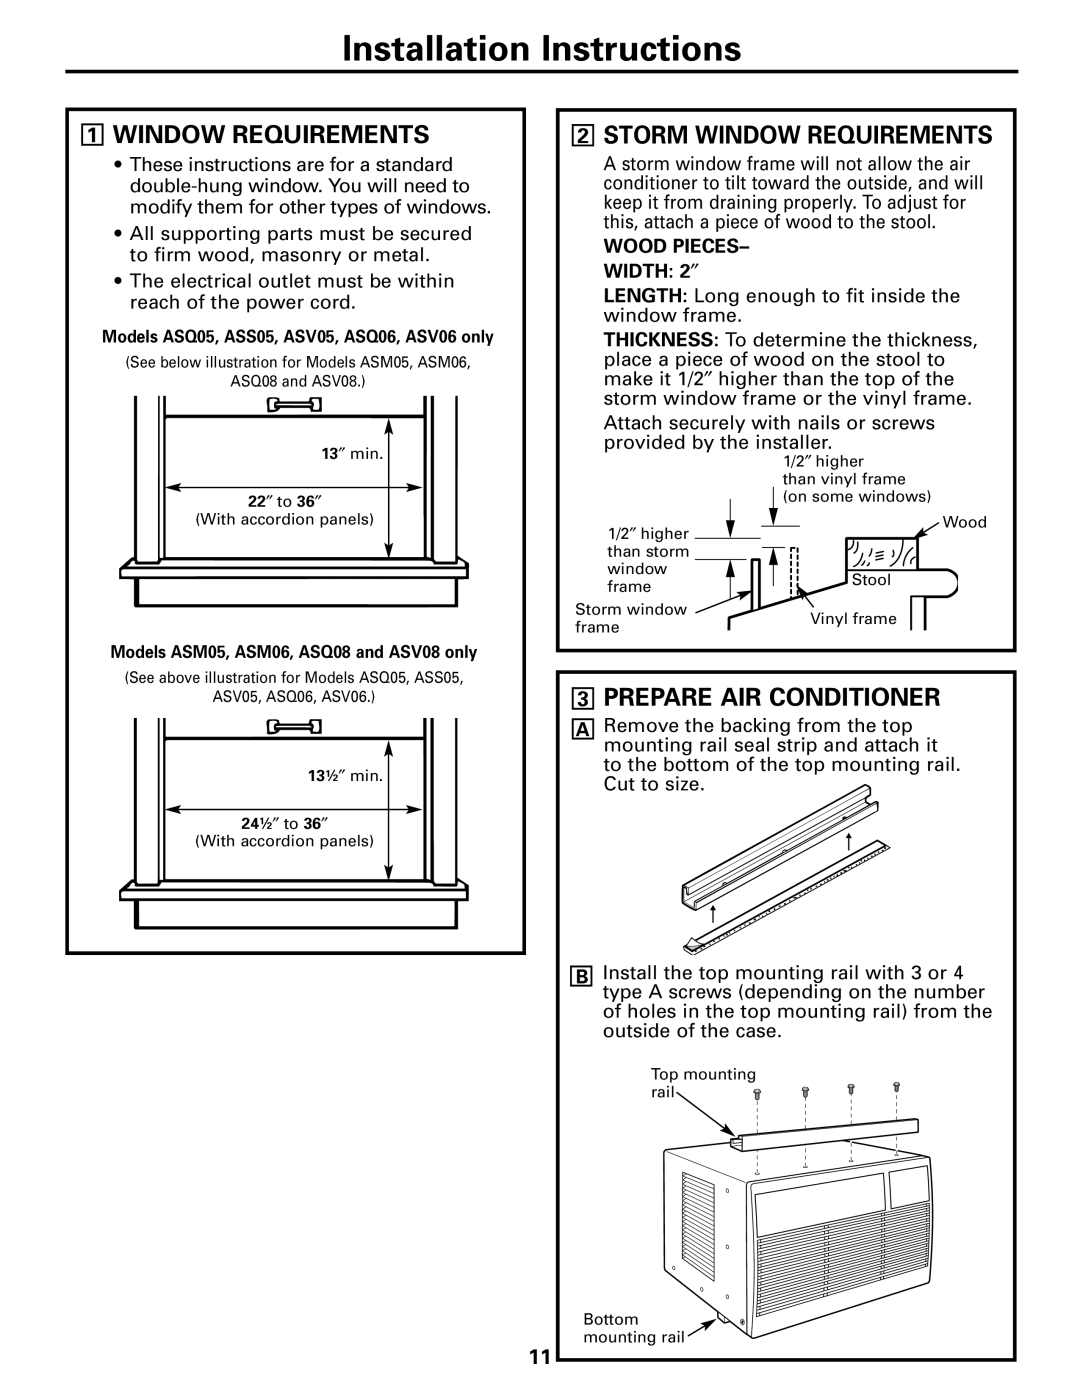 GE ASS05, ASV08 Installation Instructions, 1WINDOW REQUIREMENTS, 2STORM WINDOW REQUIREMENTS, 3PREPARE AIR CONDITIONER 